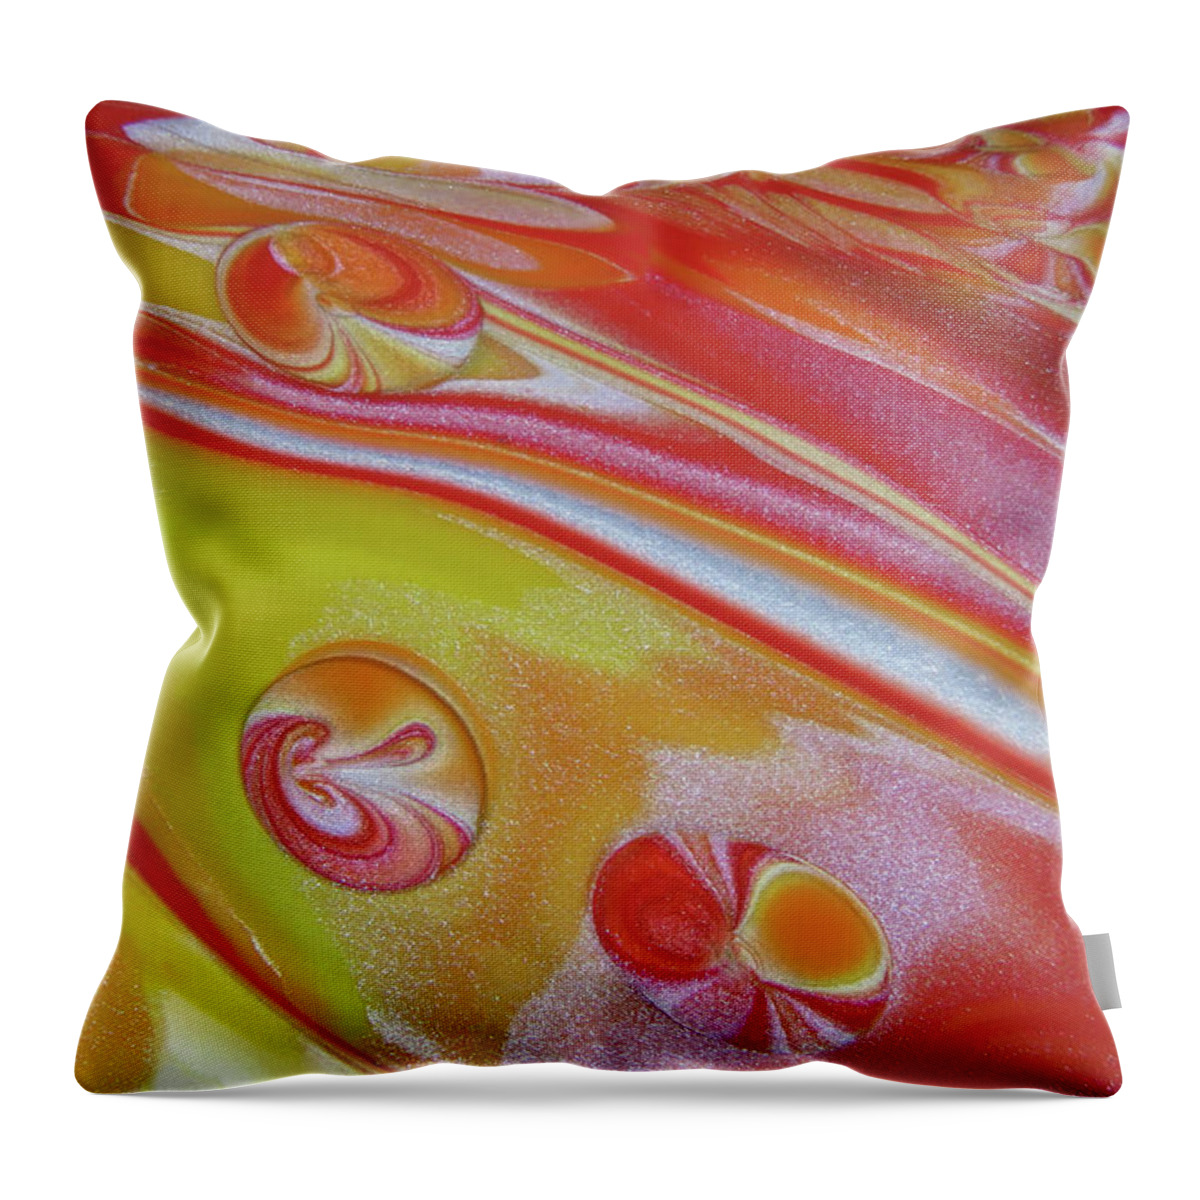 Acrylic Pour Throw Pillow featuring the painting Acrylic Pour Fire Candy by Elisabeth Lucas